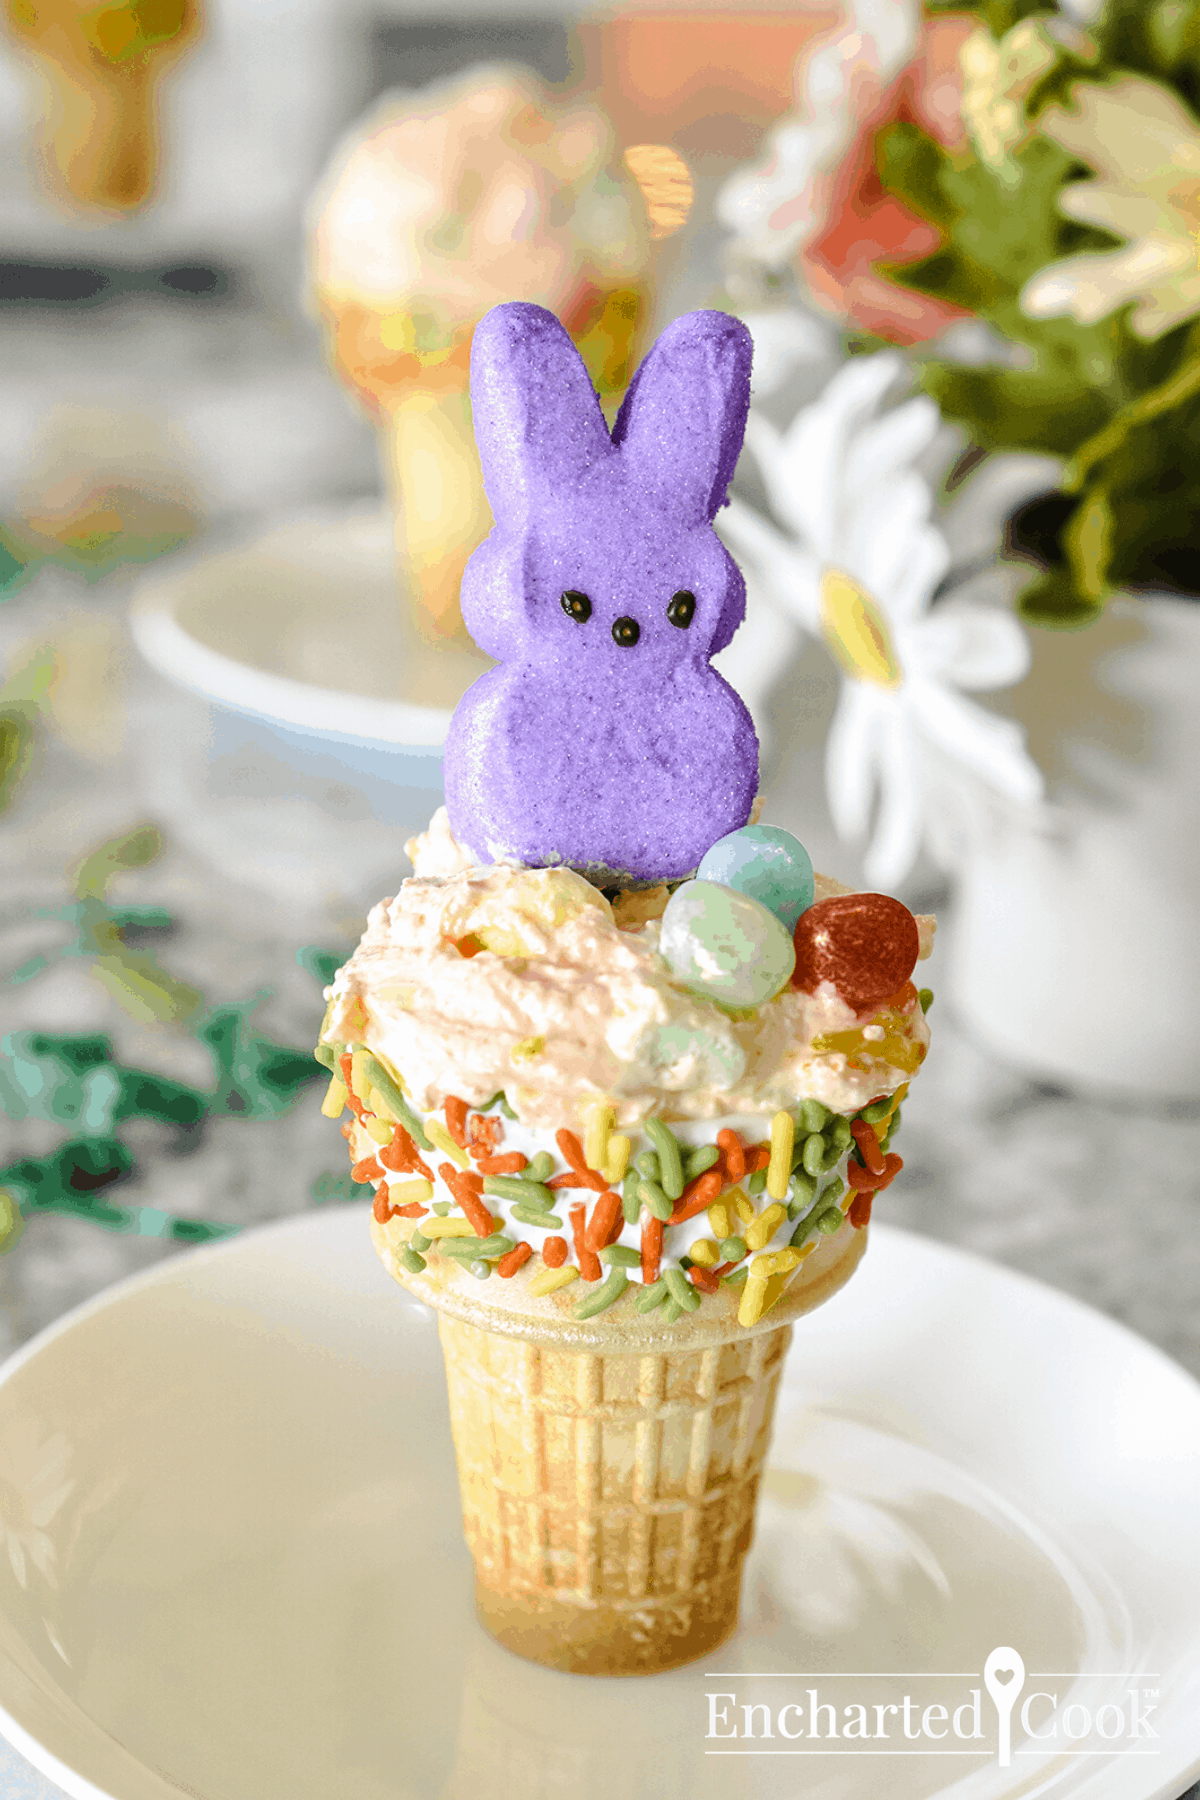 A cake cone is dipped in white candy melts and colorful jimmies and filled with fluff. A peeps bunny and jelly beans decorate the top.